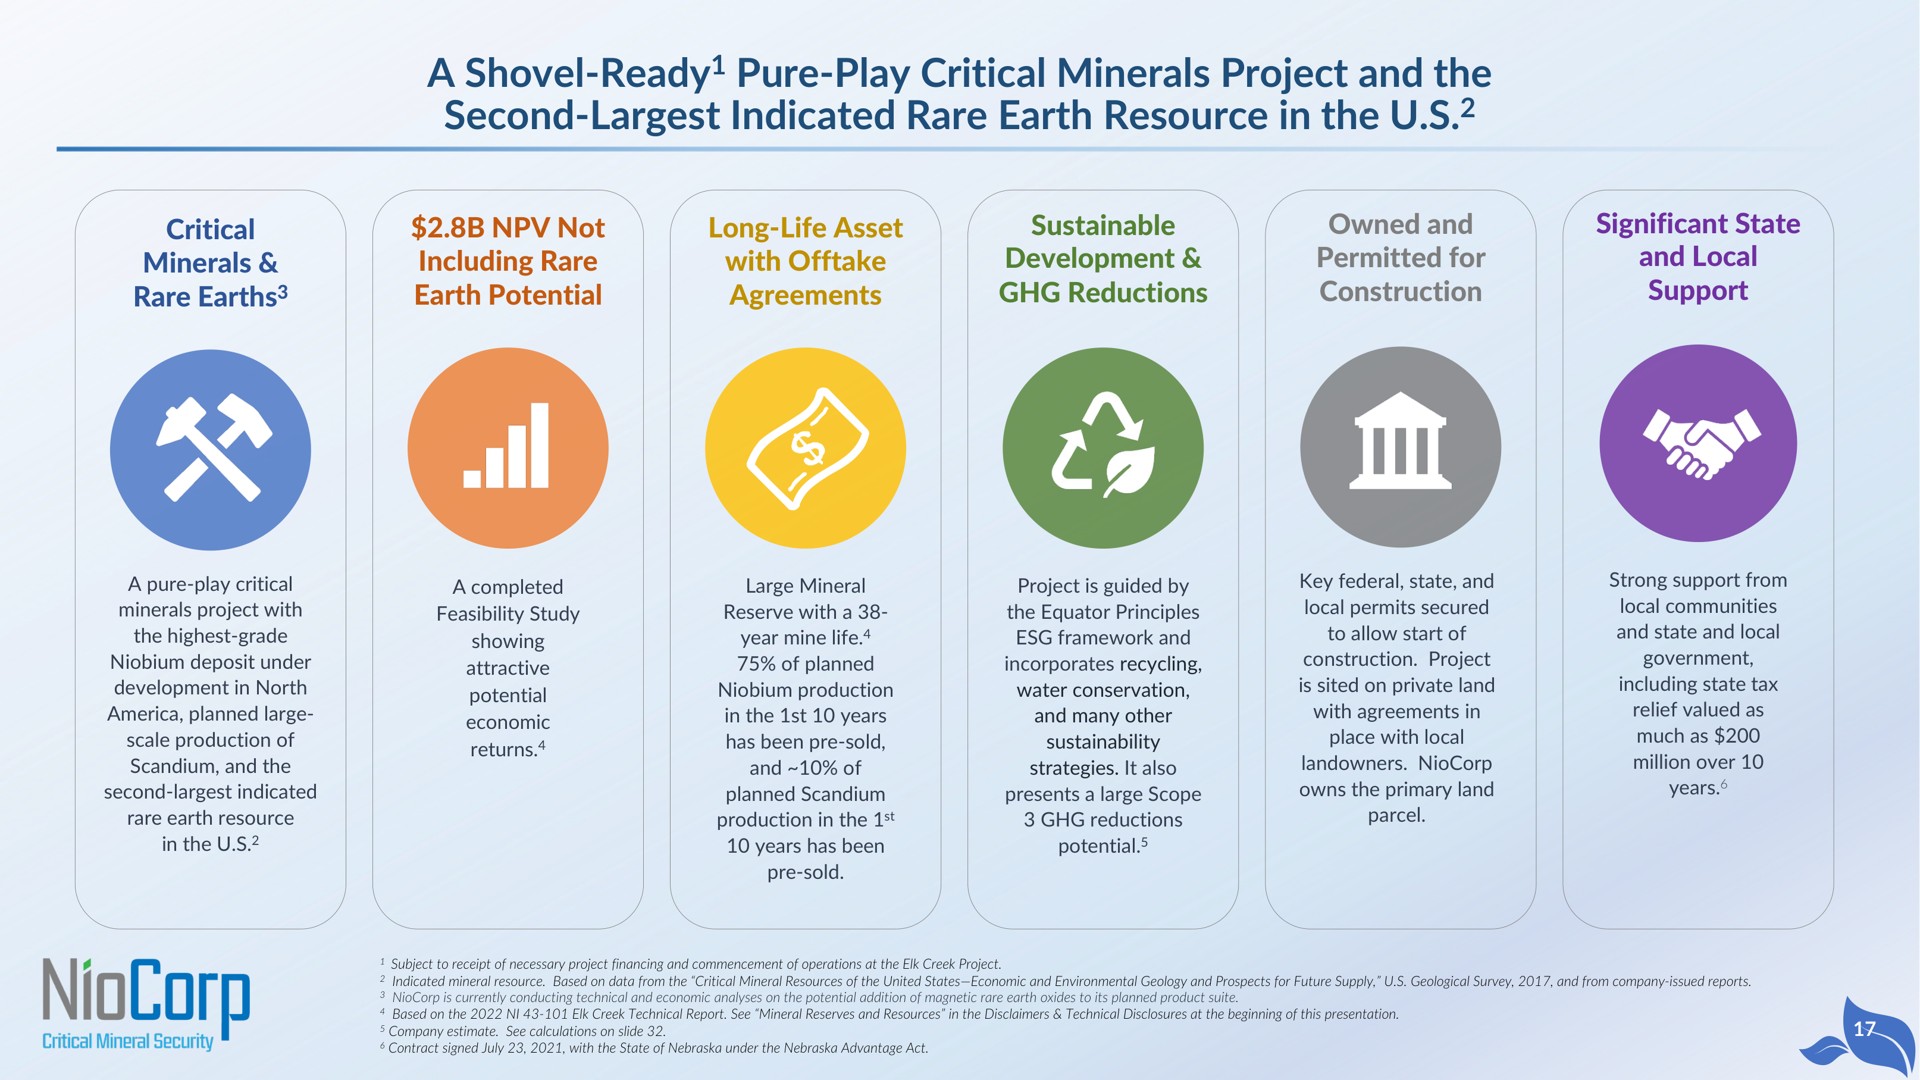 a shovel ready pure play critical minerals project and the second indicated rare earth resource in the critical minerals rare earths not including rare earth potential long life asset with offtake agreements sustainable development reductions owned and permitted for construction significant state and local support shovel ready | NioCorp